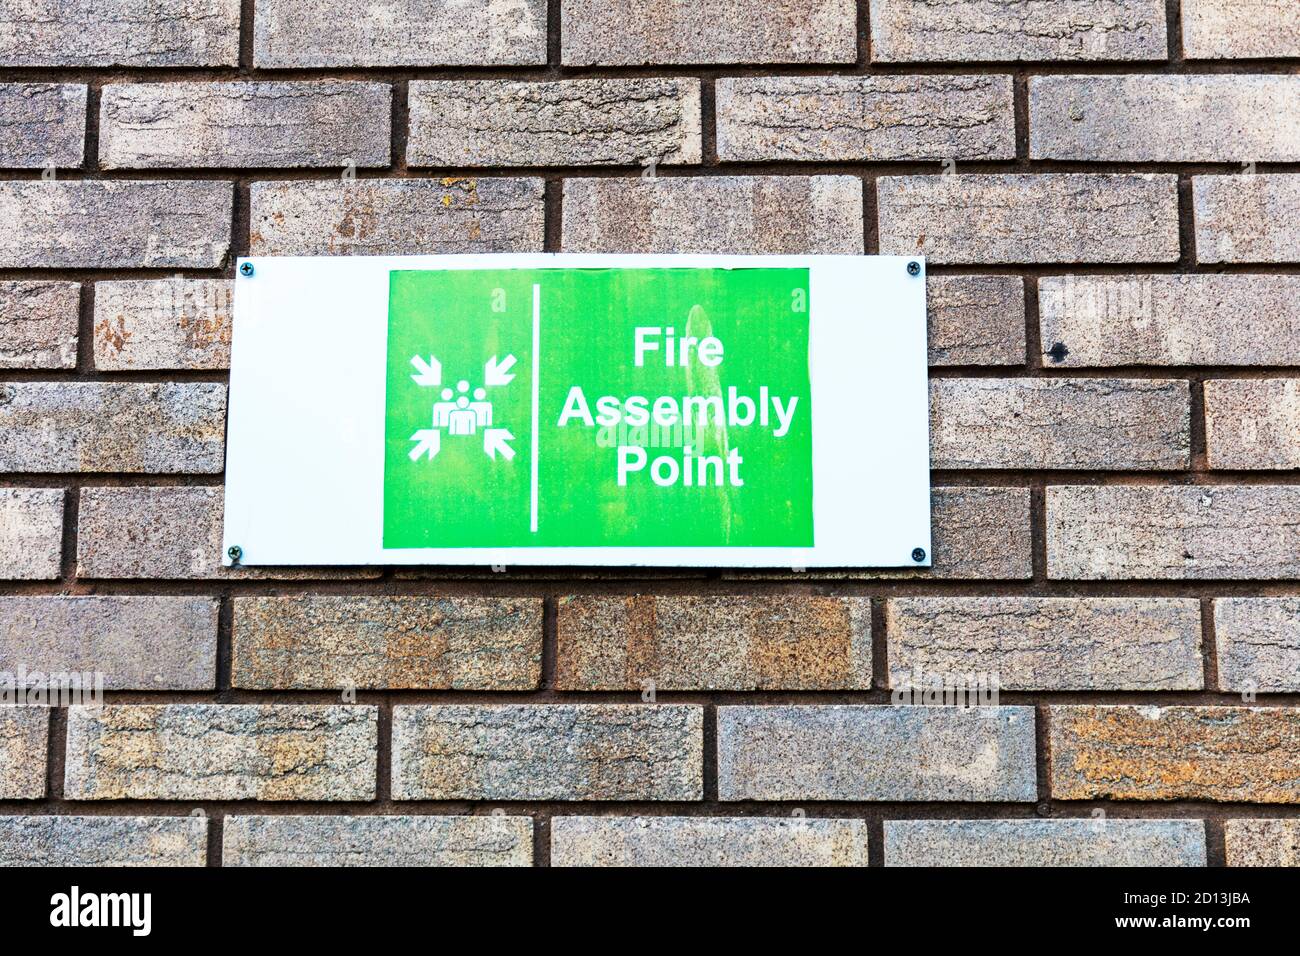 Fire assembly point sign, Fire assembly point, sign, signs, staff can assemble safely, assemble near sign, fire sign, assembly point, assembly points Stock Photo